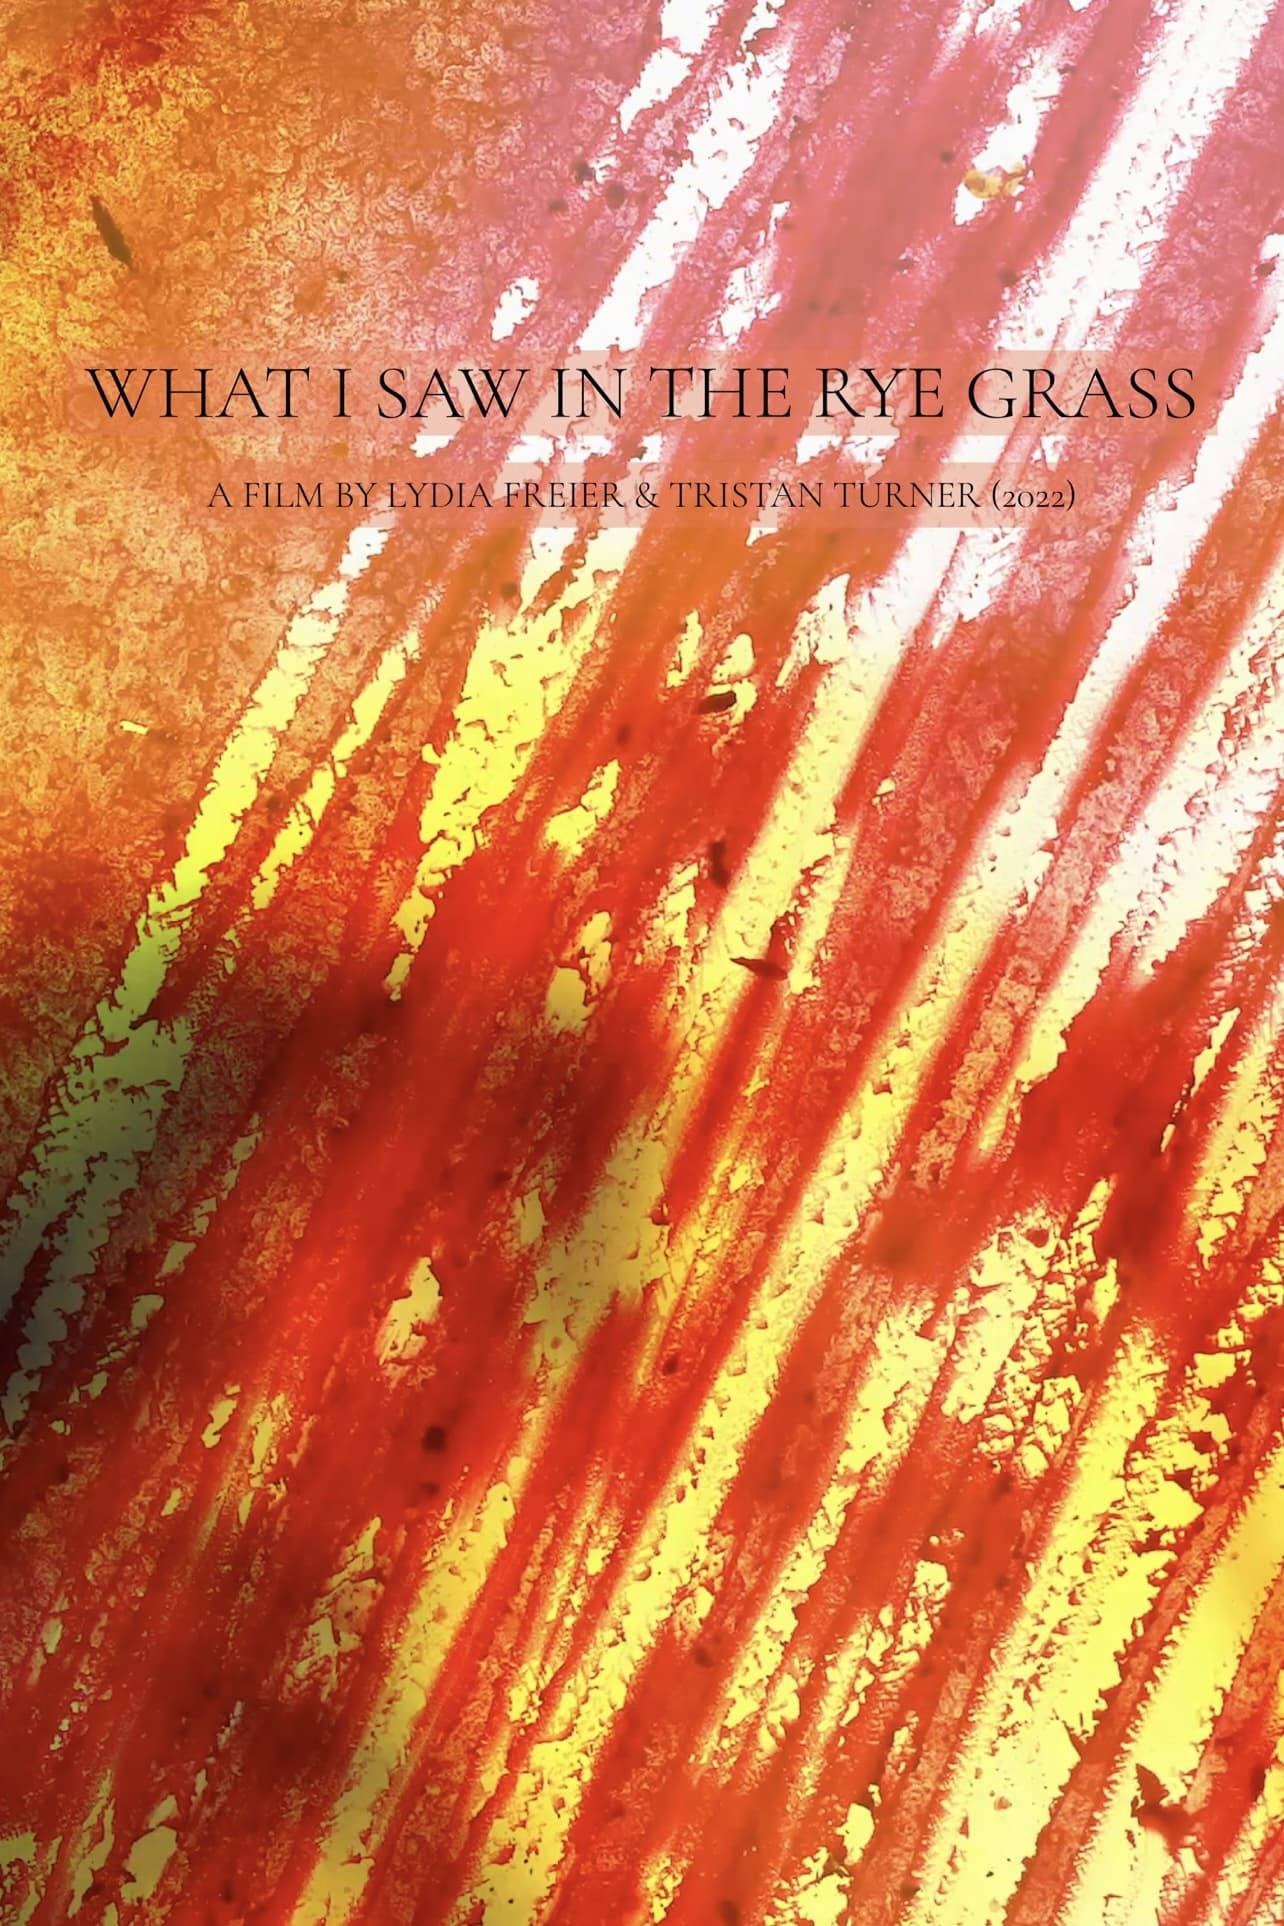 What I Saw in the Rye Grass